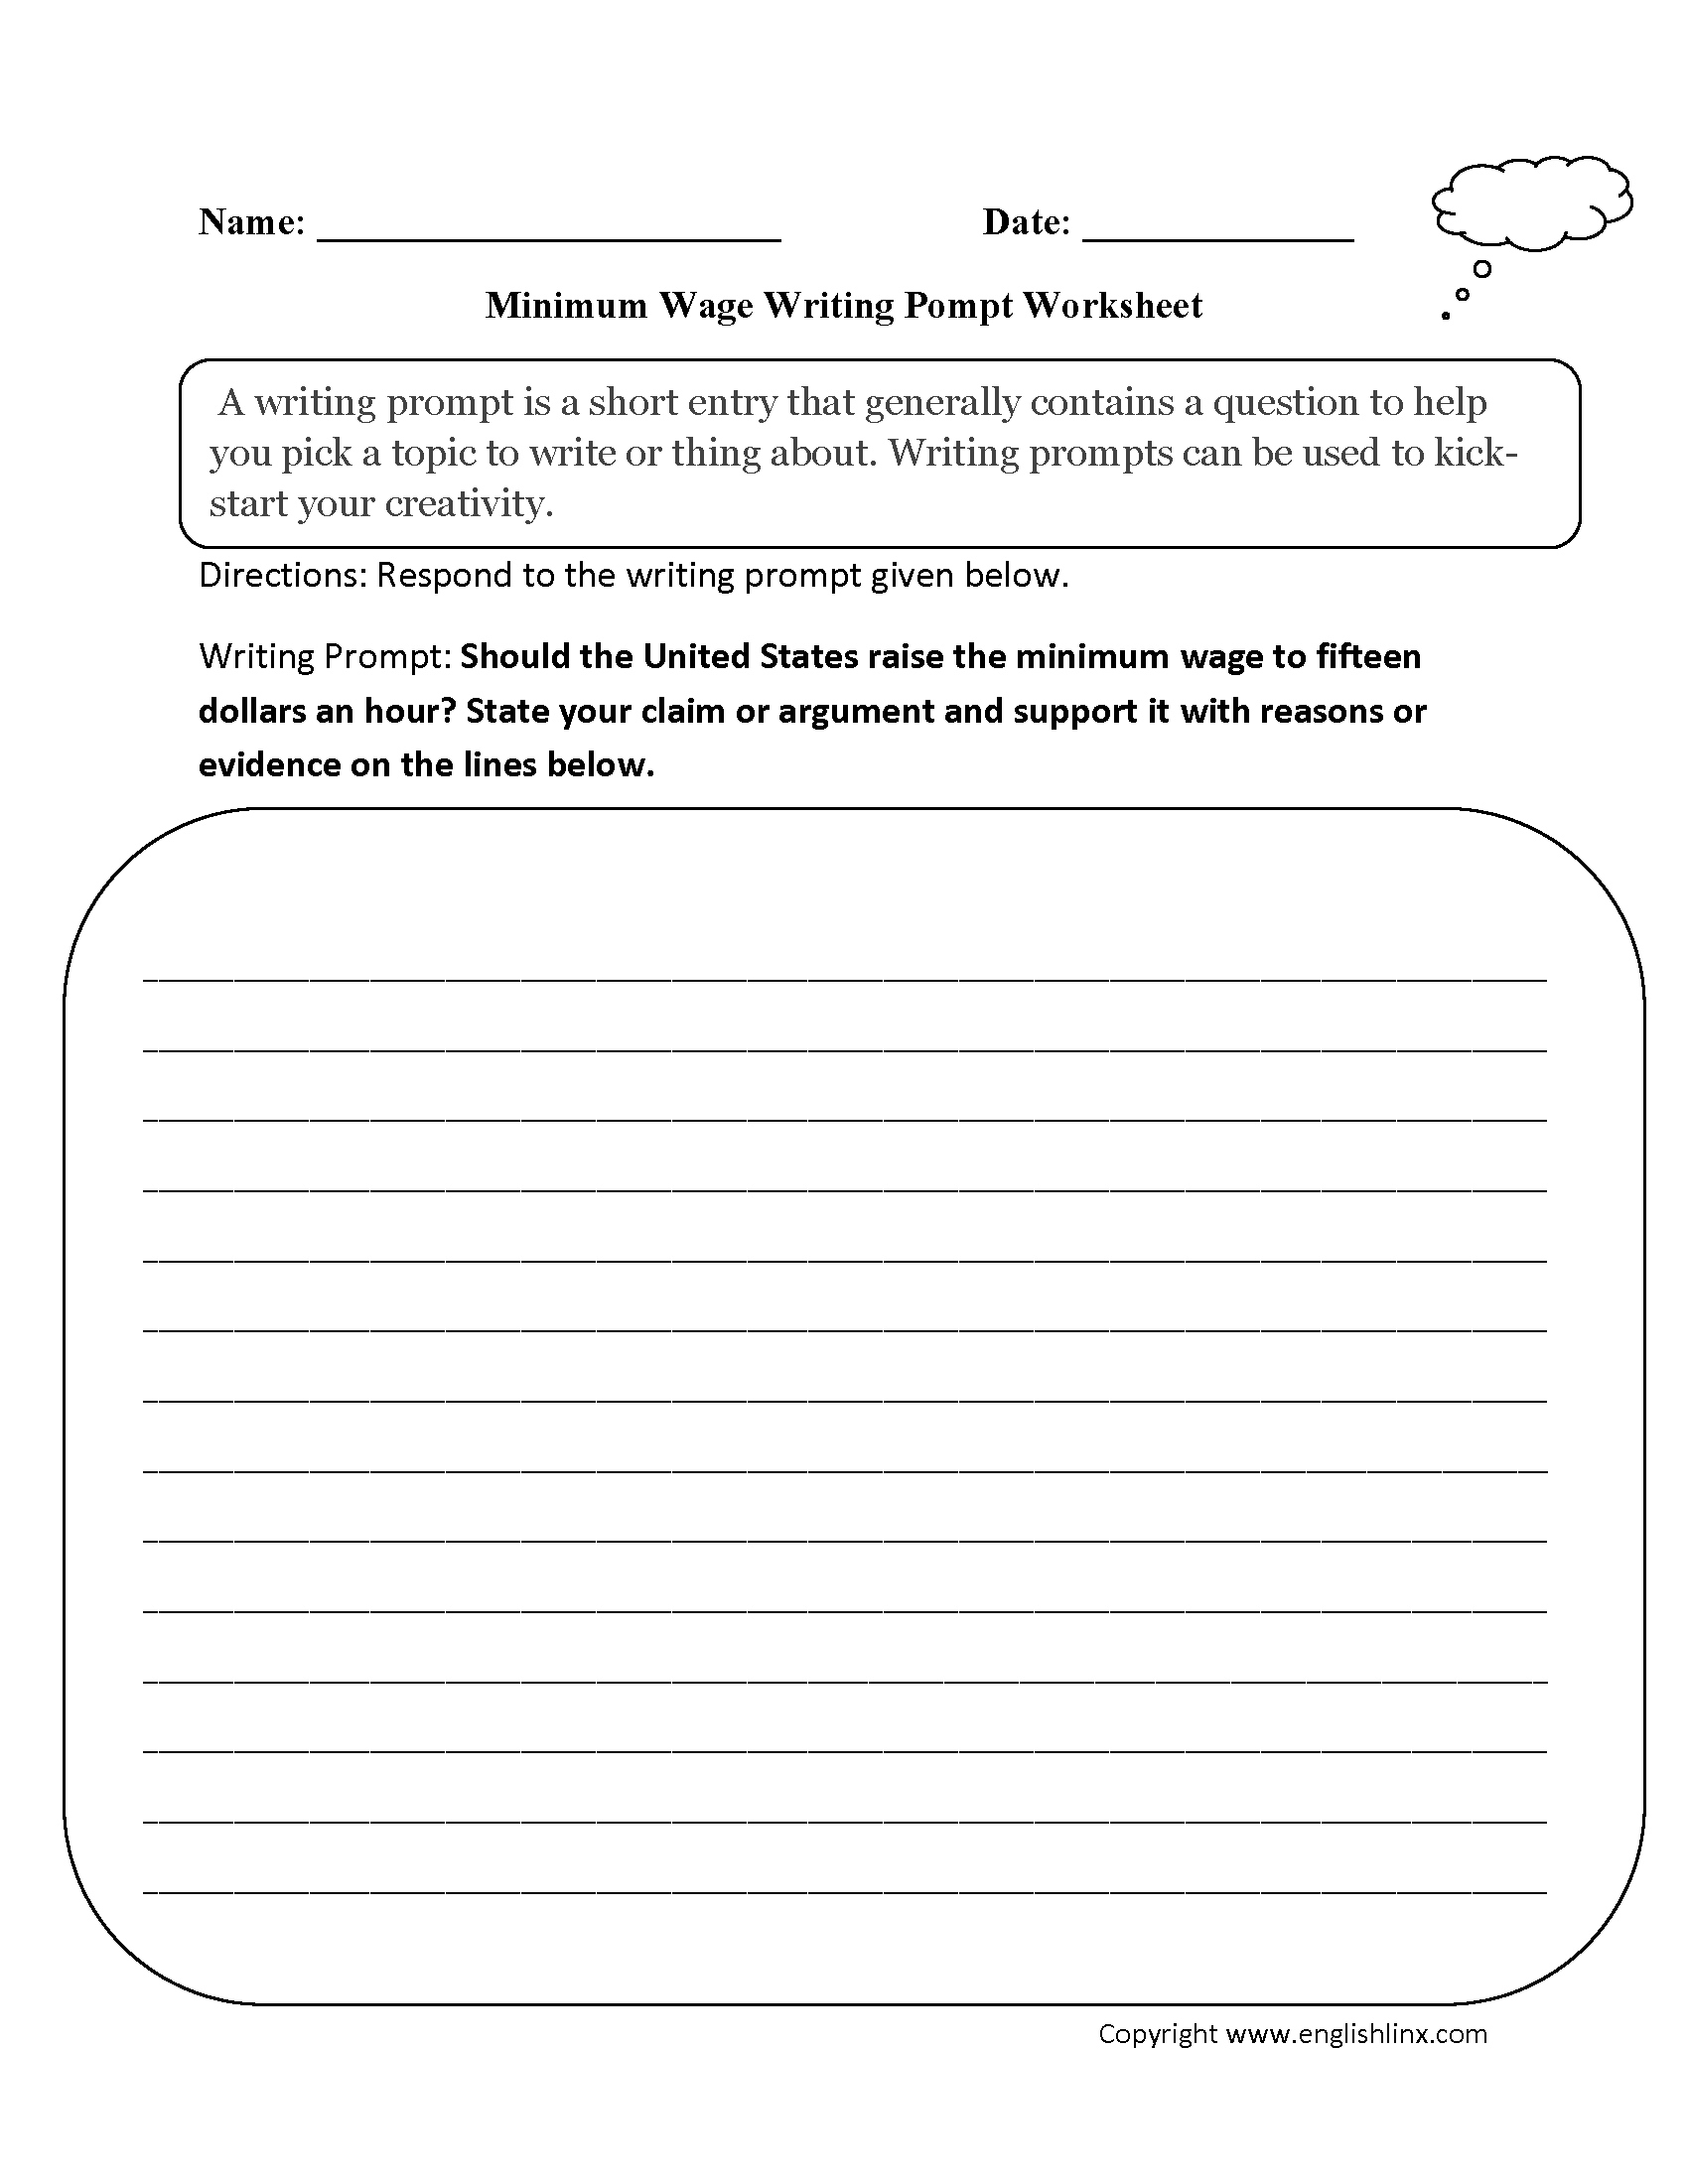 essay writing worksheets for elementary students